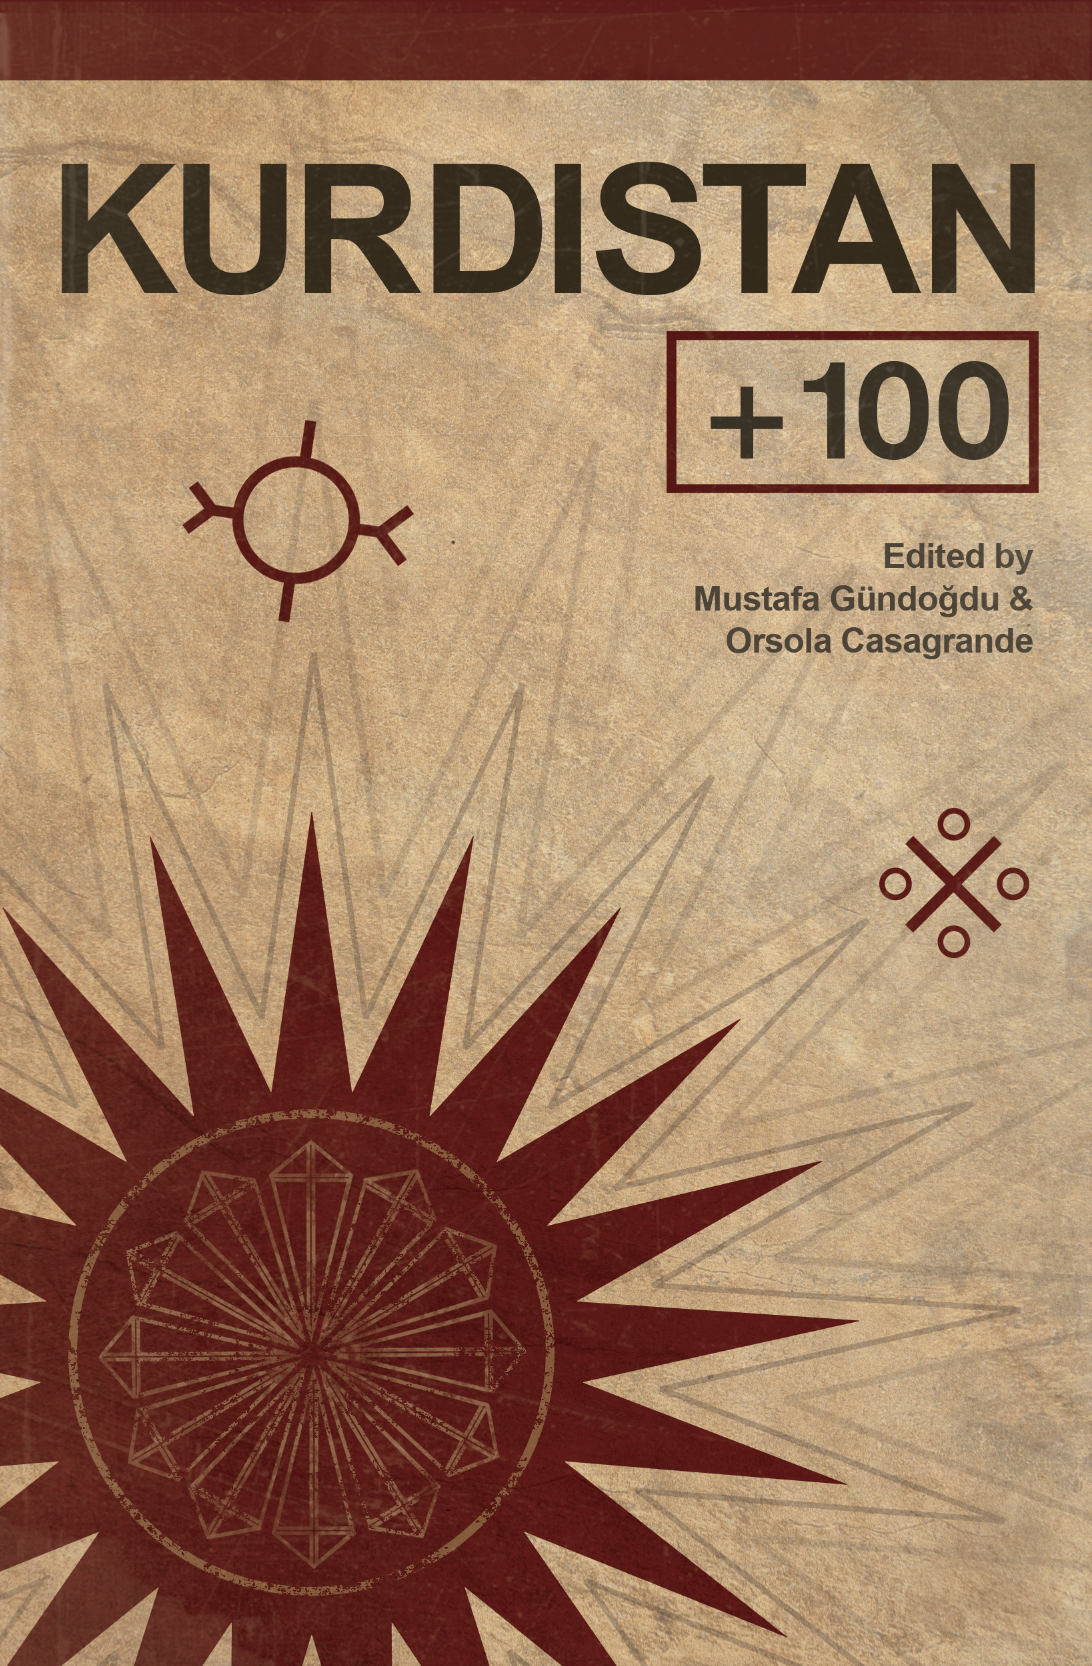 Cover of story anthology "Kurdistan +100", edited by Orsola Casagrande and Mustafa Gundogdu and published in English by Comma Press